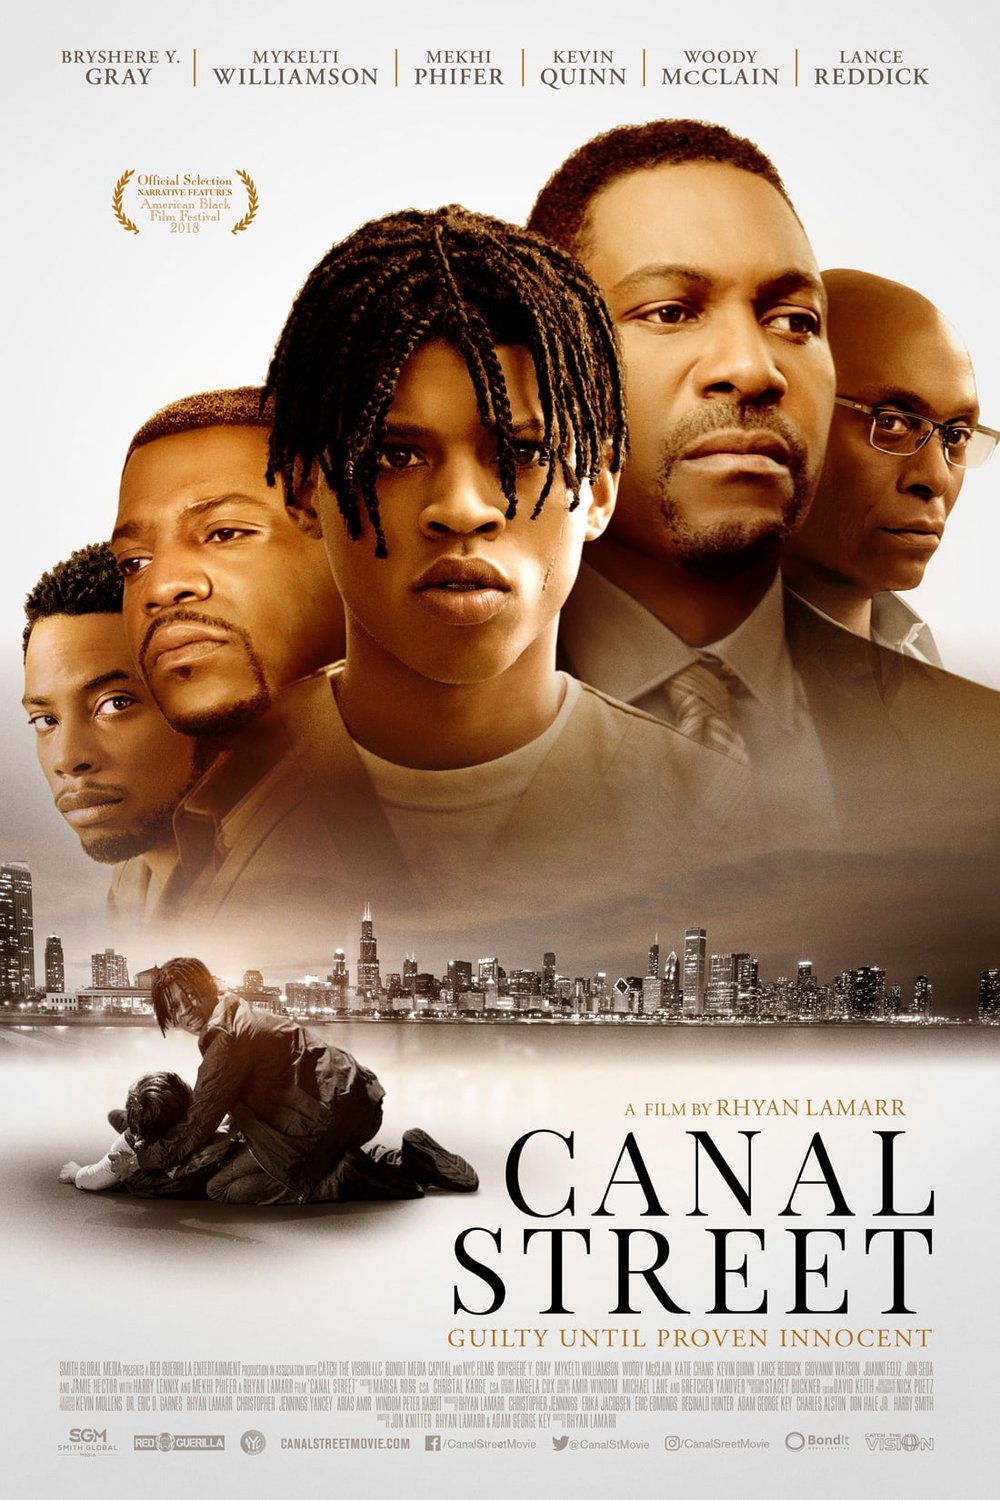 Poster of the movie Canal Street